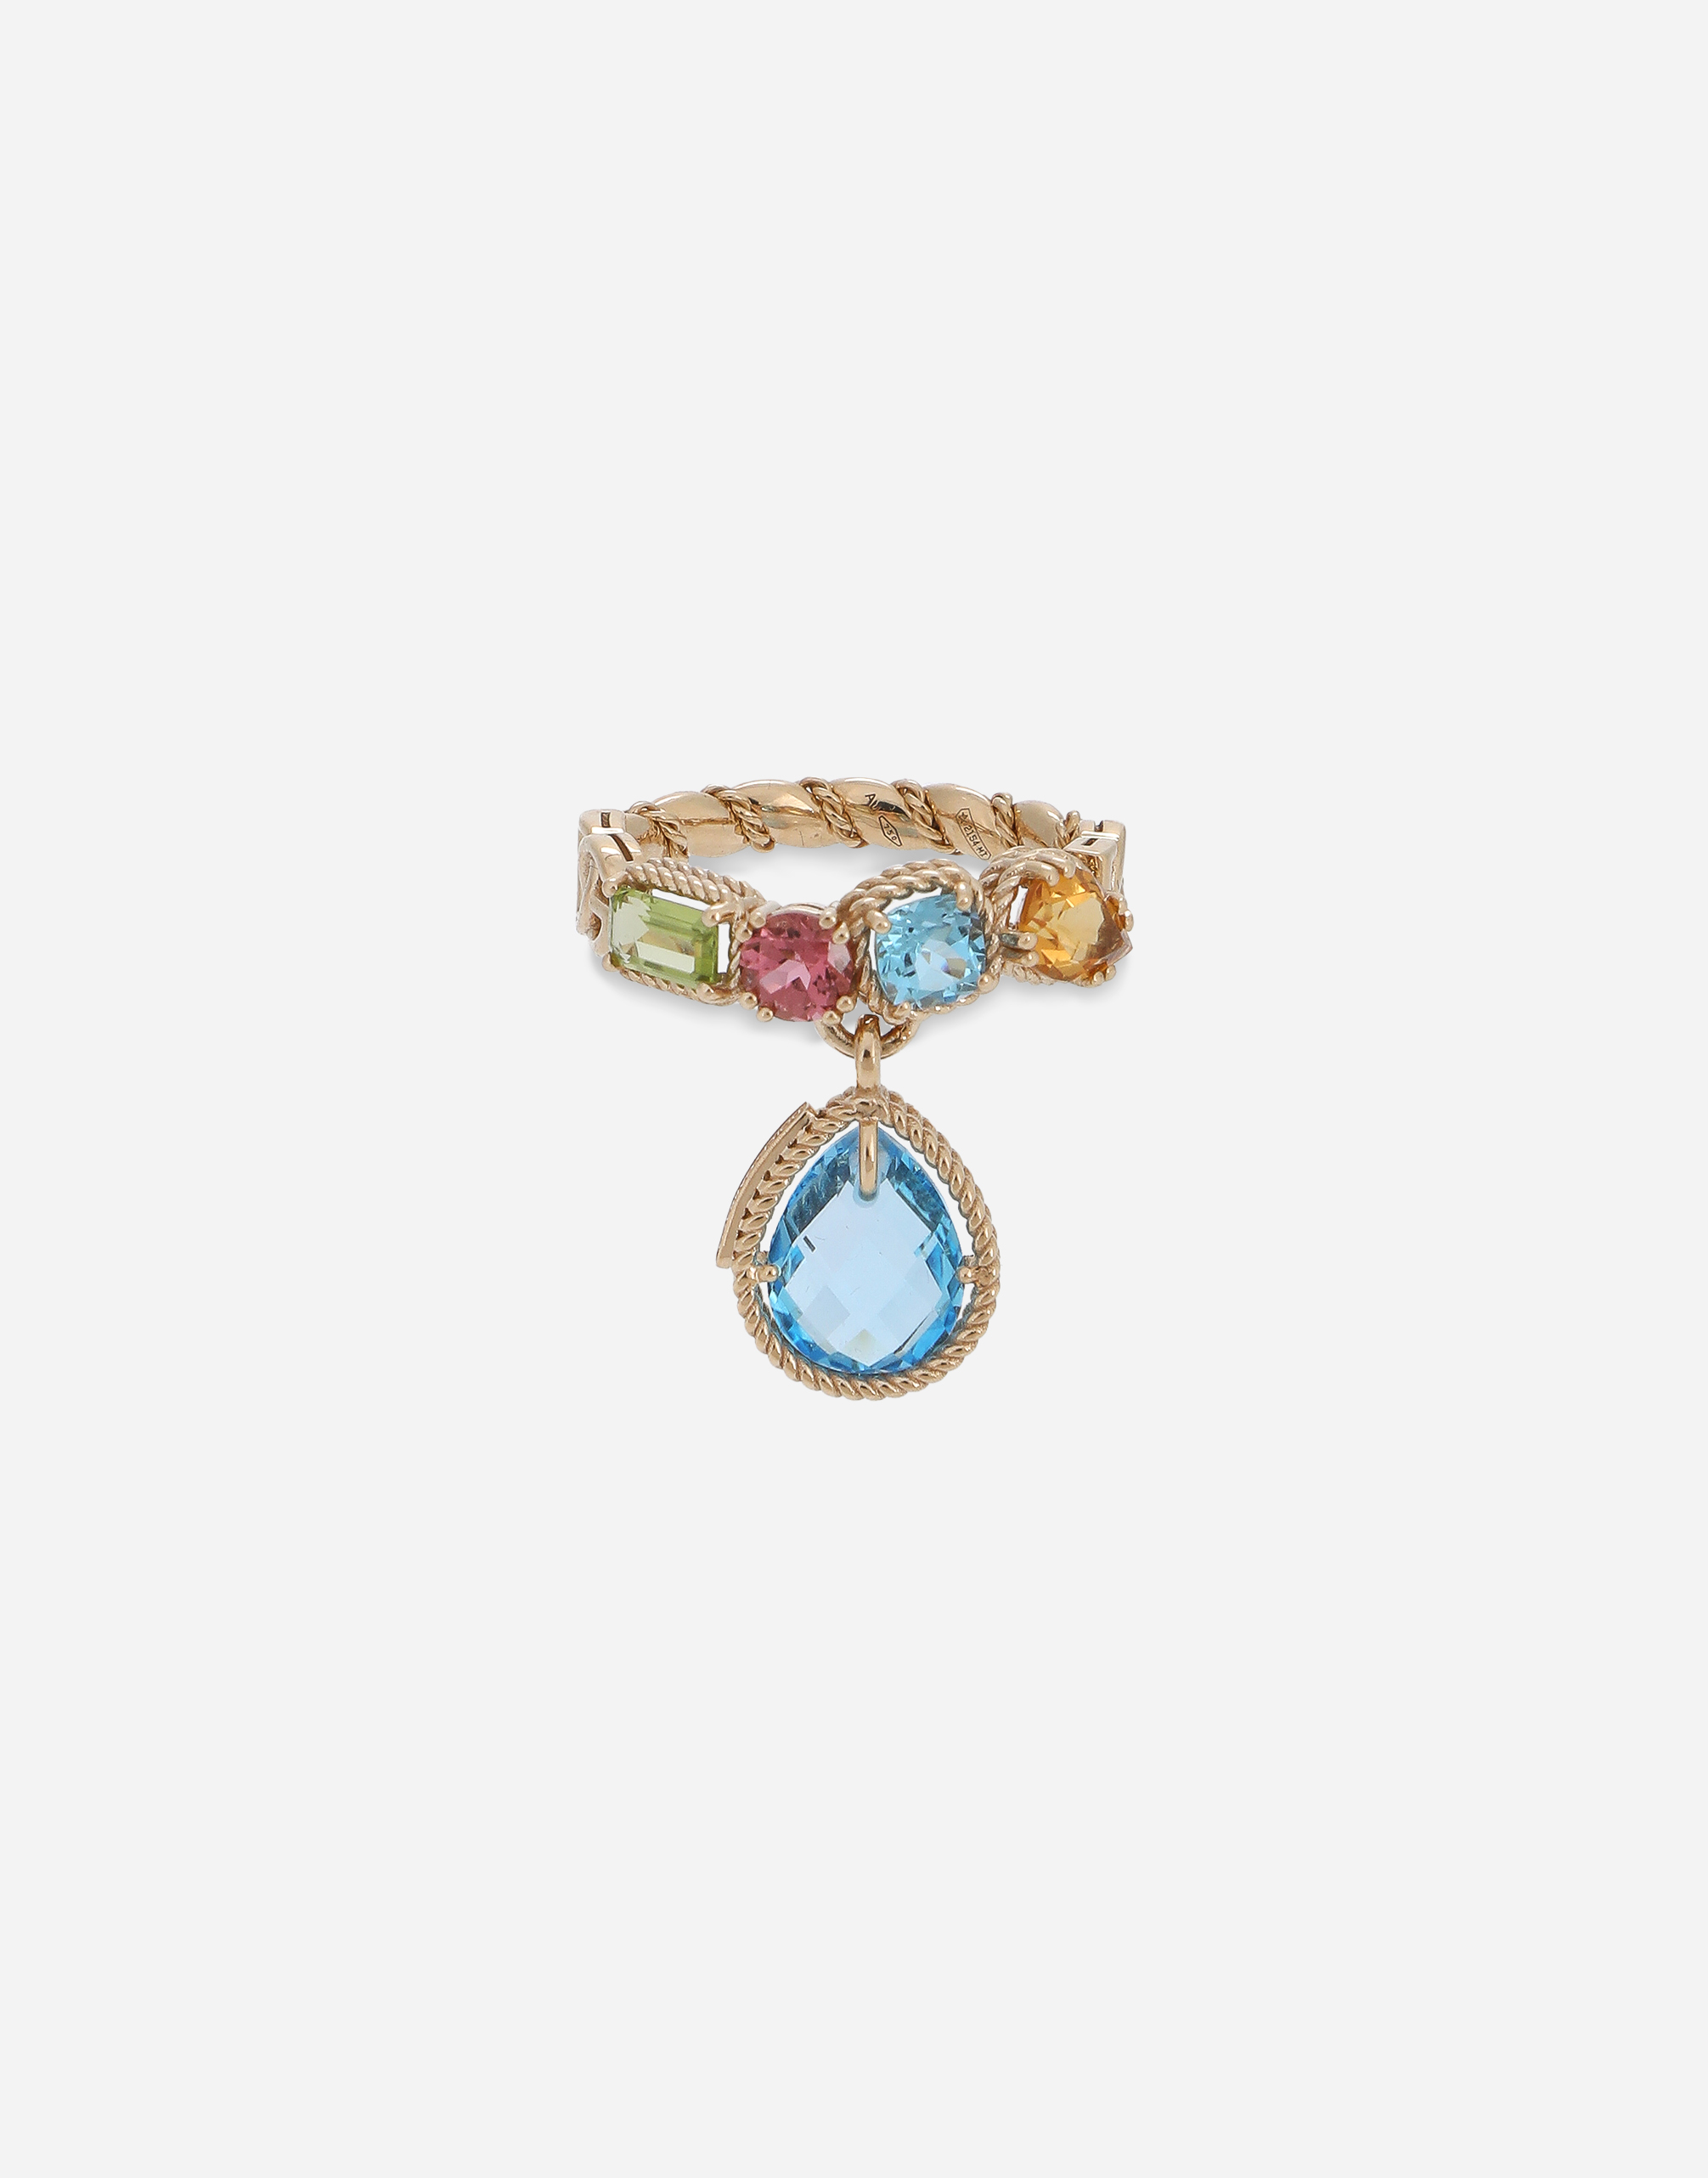 18 kt yellow gold ring with multicolor fine gemstones in Yellow Gold